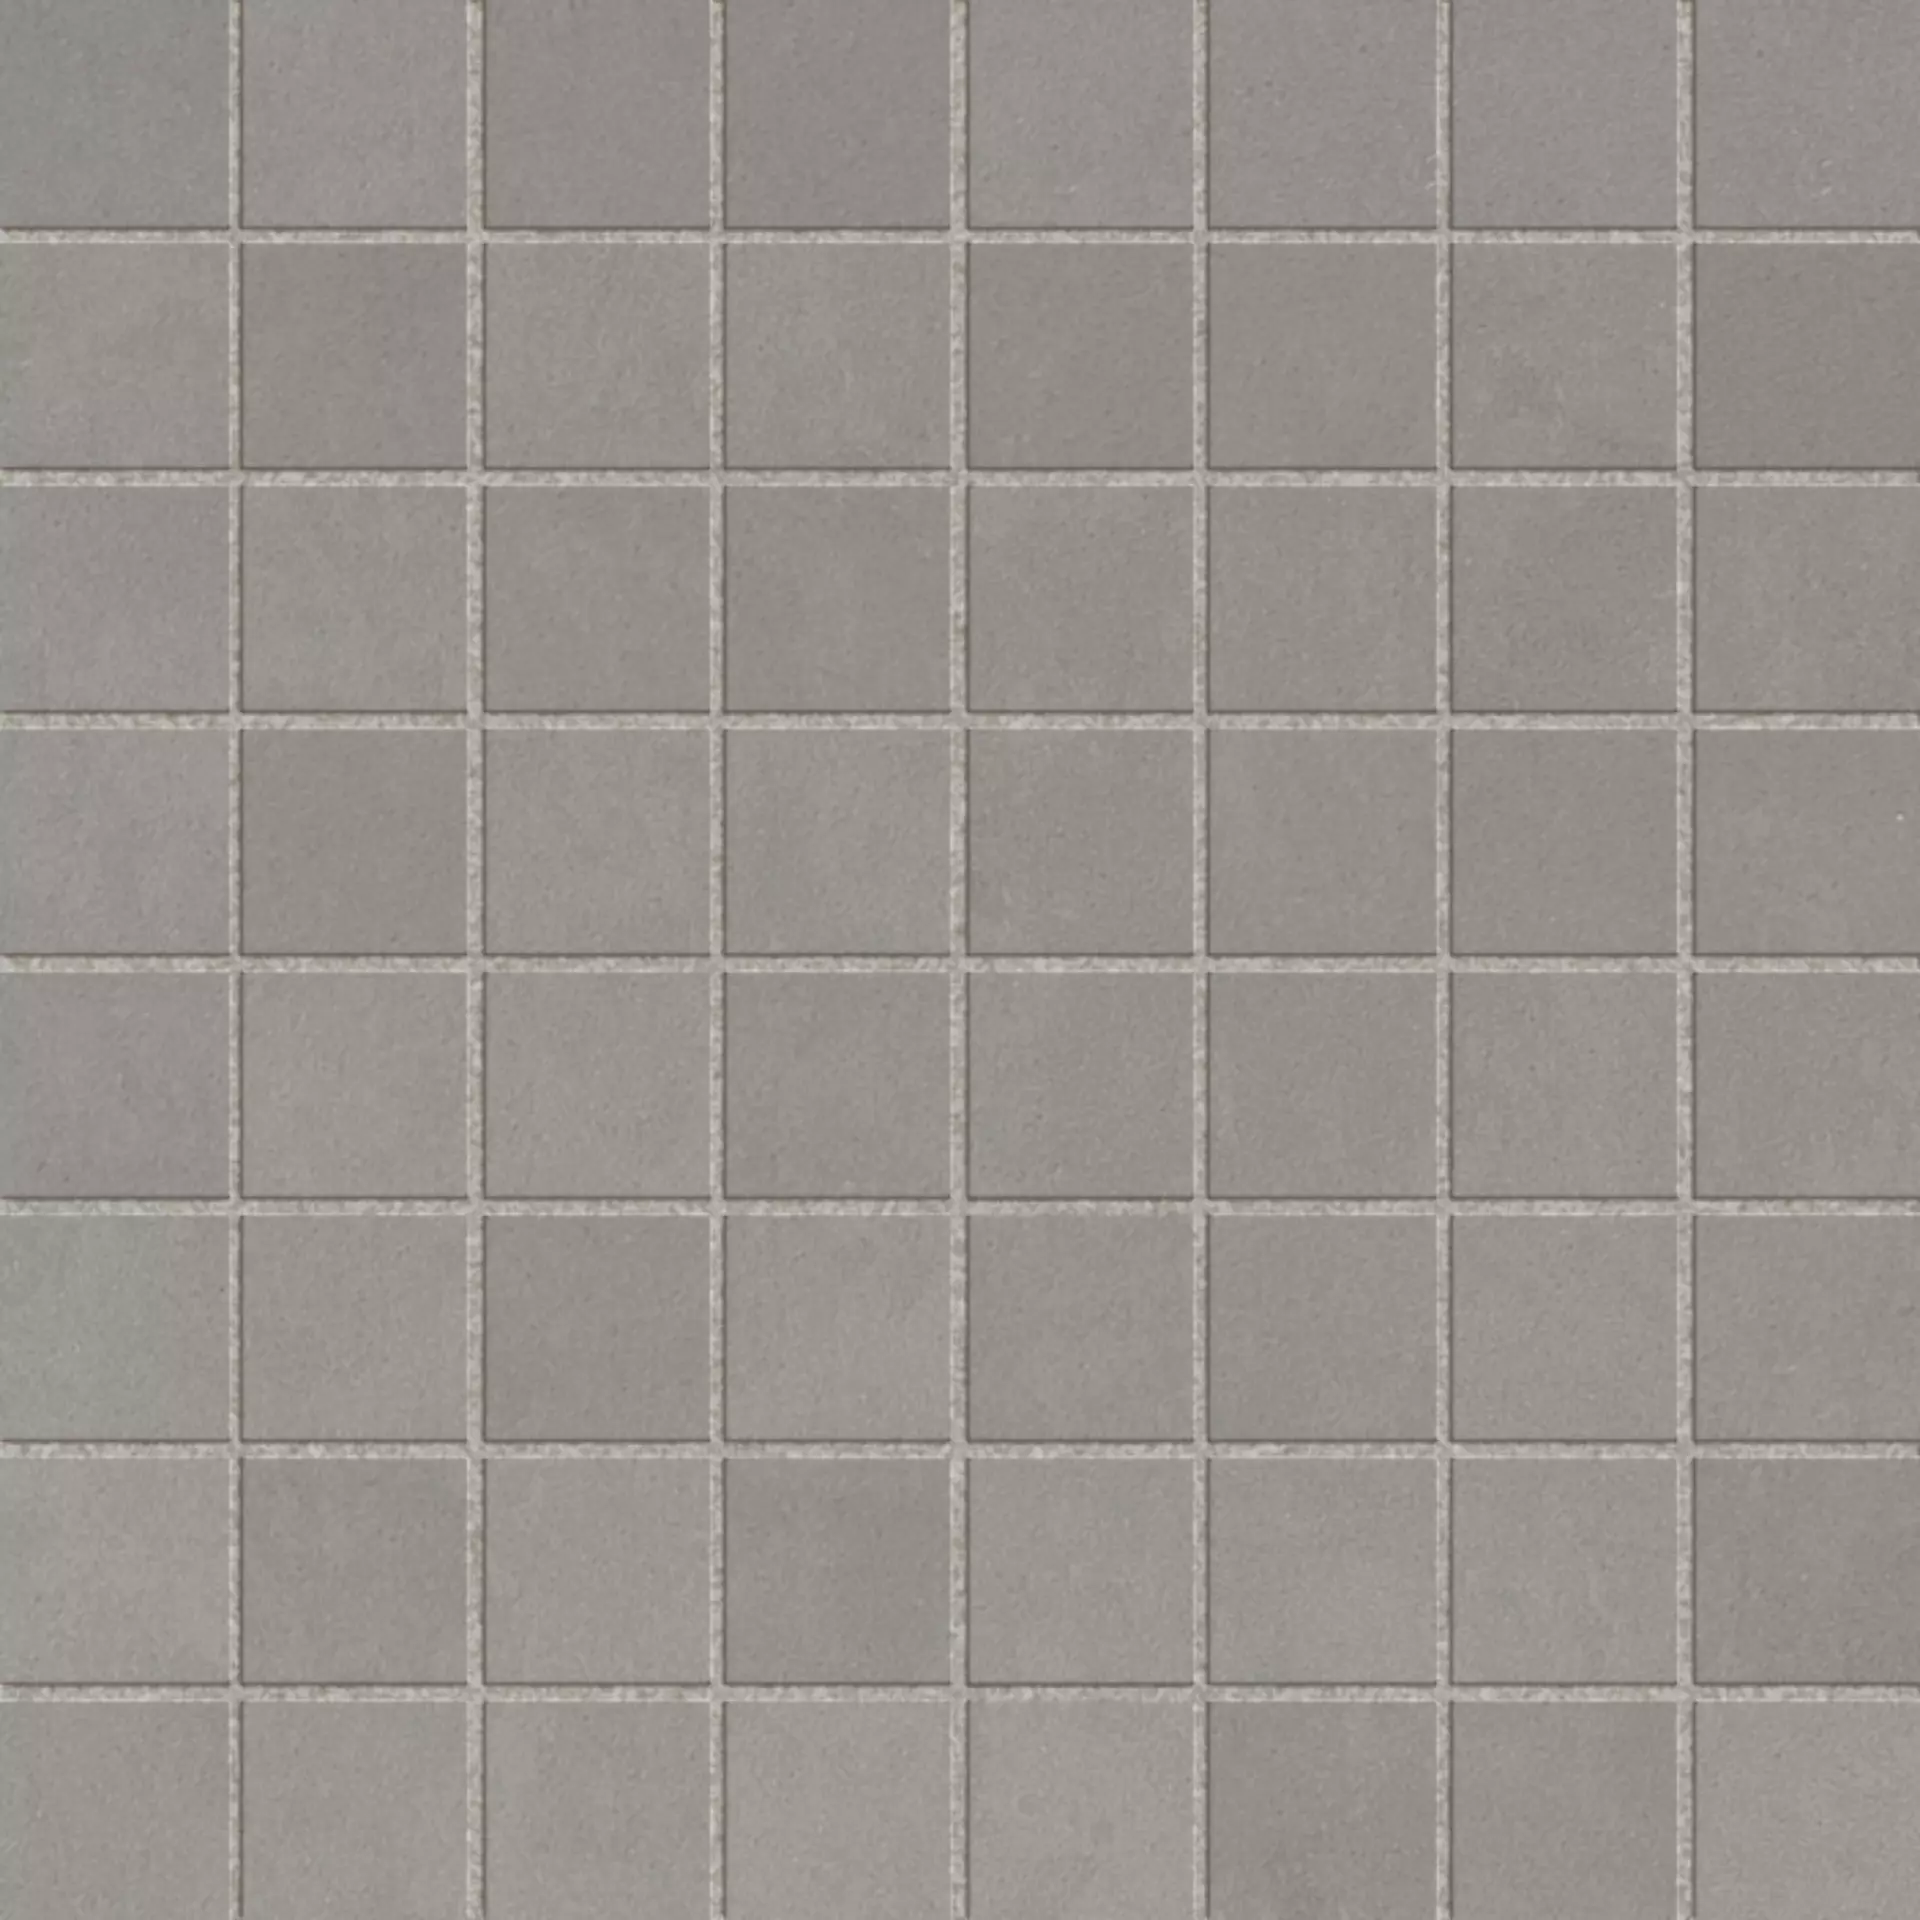 Margres Time 2.0 Grey Polished Antibacterial Mosaic 3,5x3,5 B25M33T276F 30x30cm rectified 10,5mm